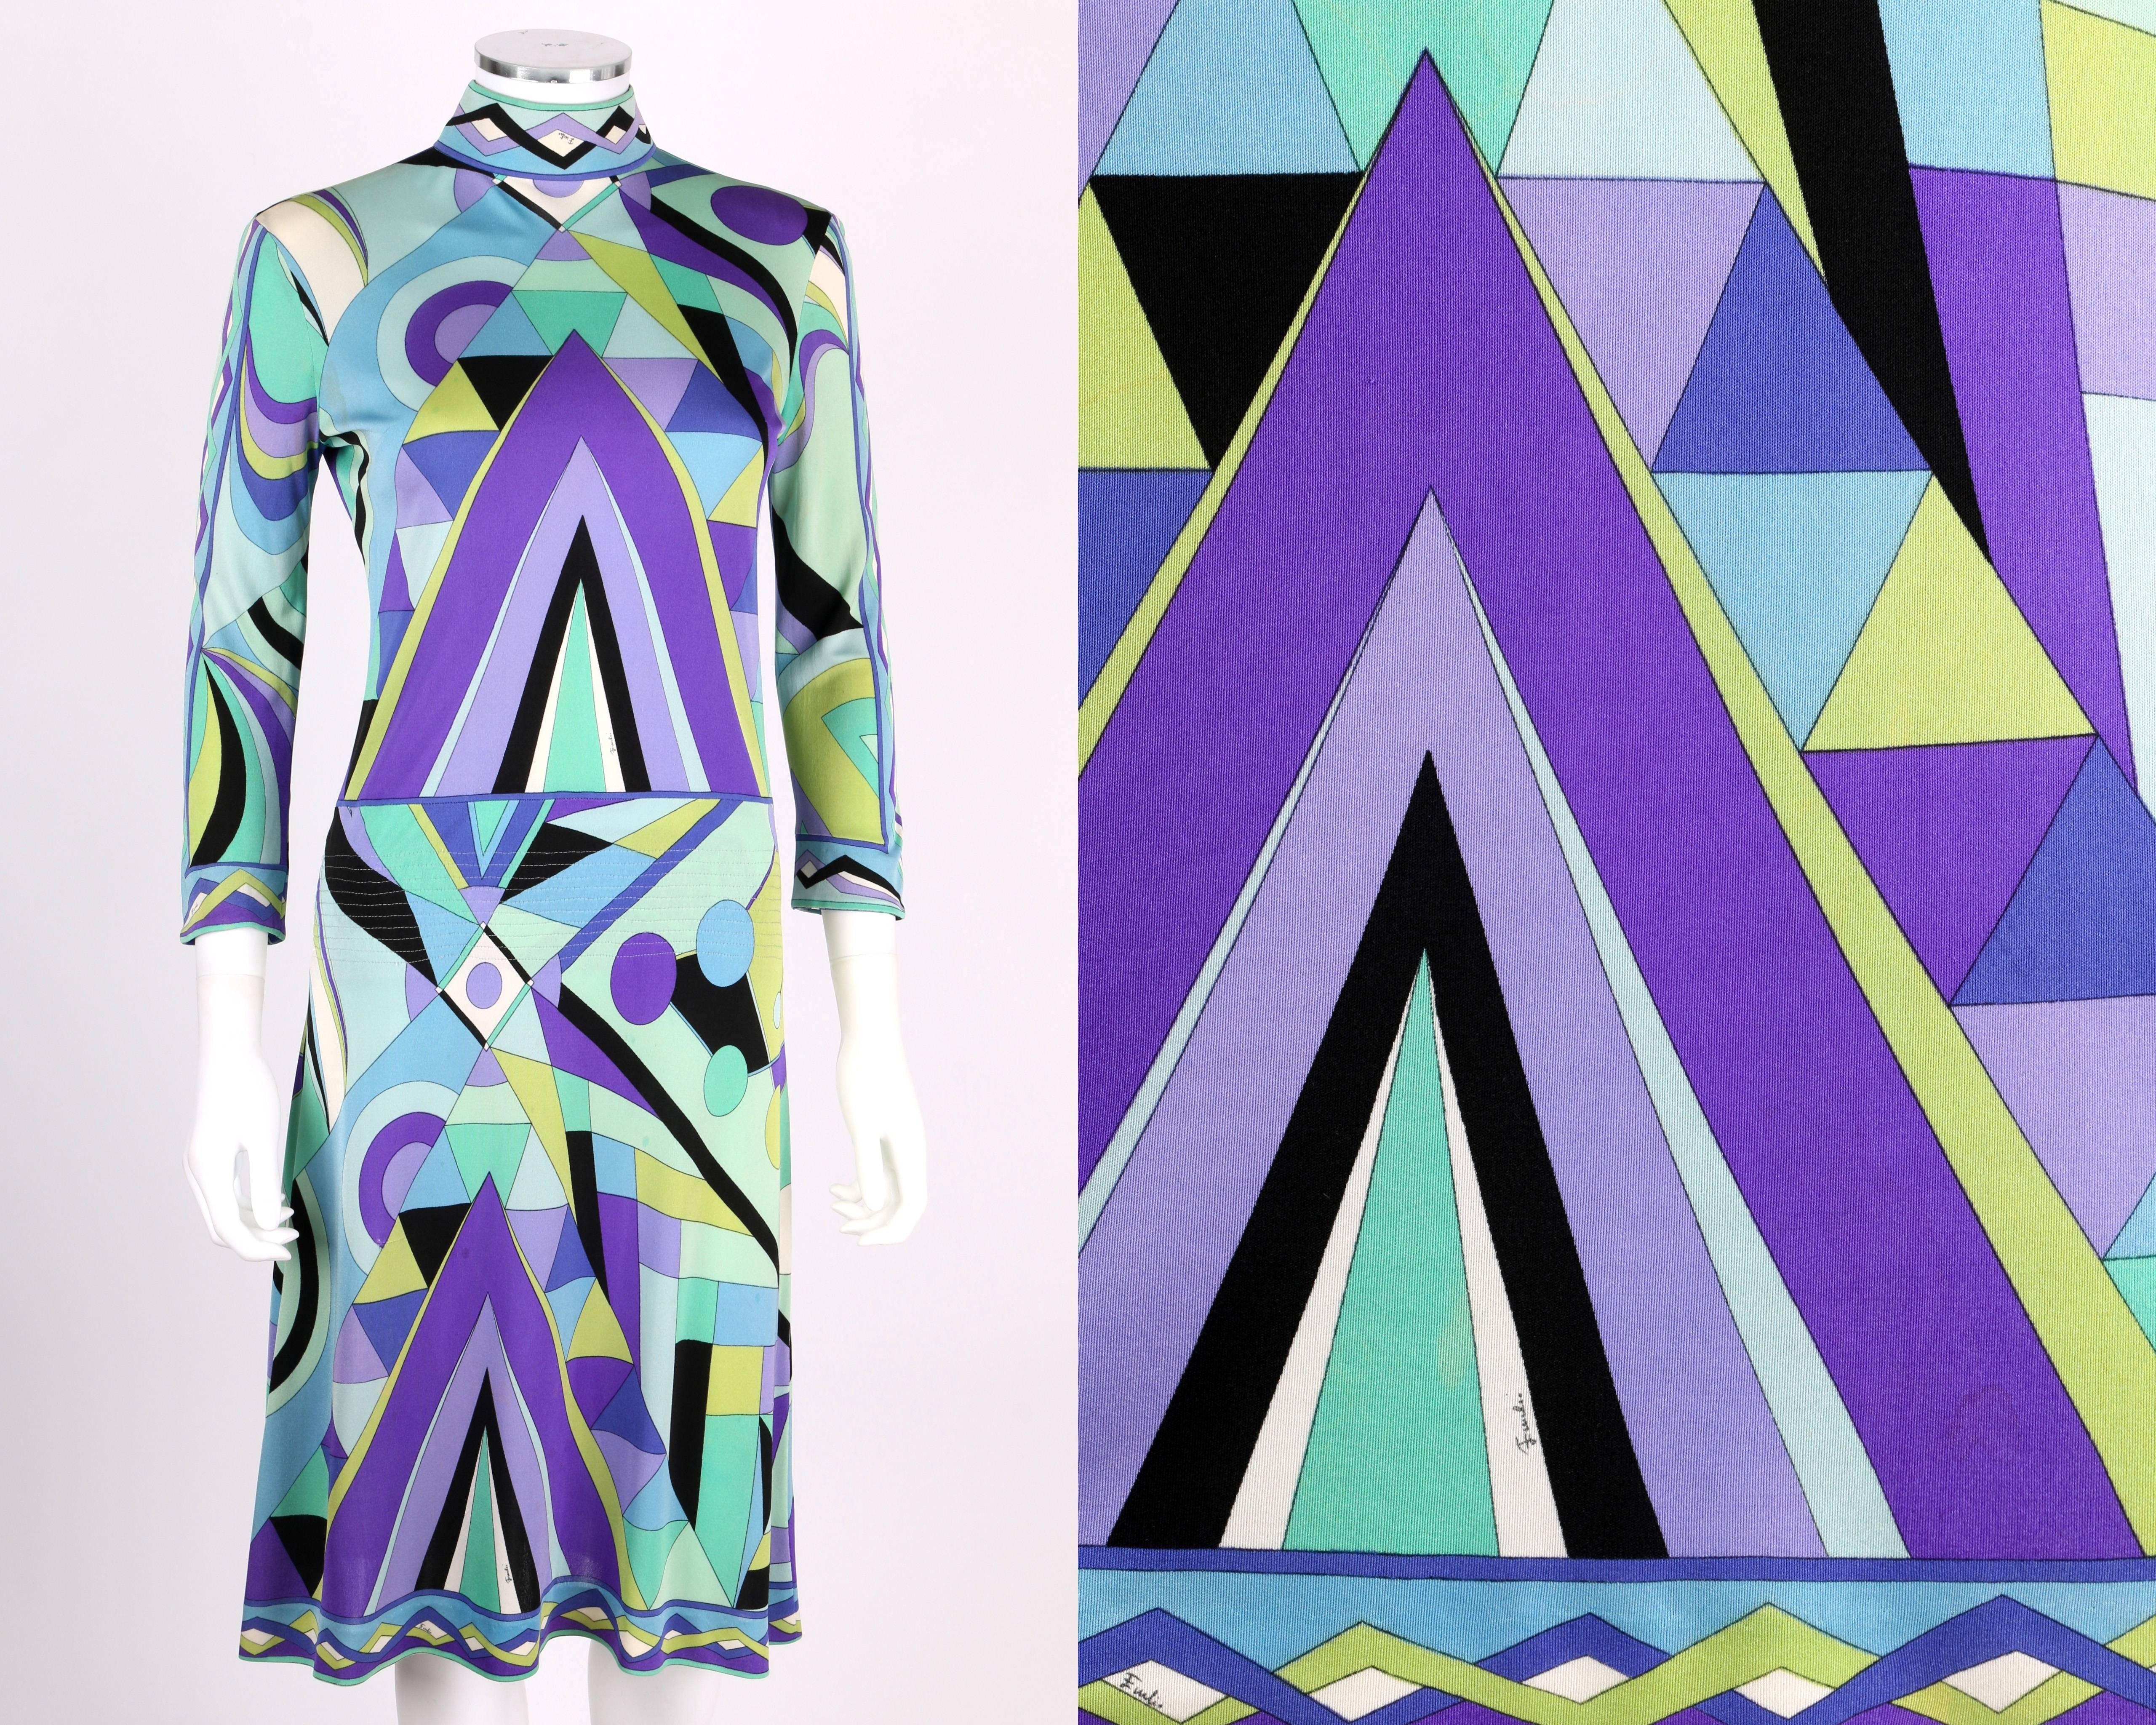 Vintage c. 1960s Emilio Pucci silk jersey A-line knee length dress. All over signature print in green, purple, blue, black and white.  High mock neck collar. 3/4 length sleeves. Quilted detail at hips. Center back zipper. Marked Fabric Content: 